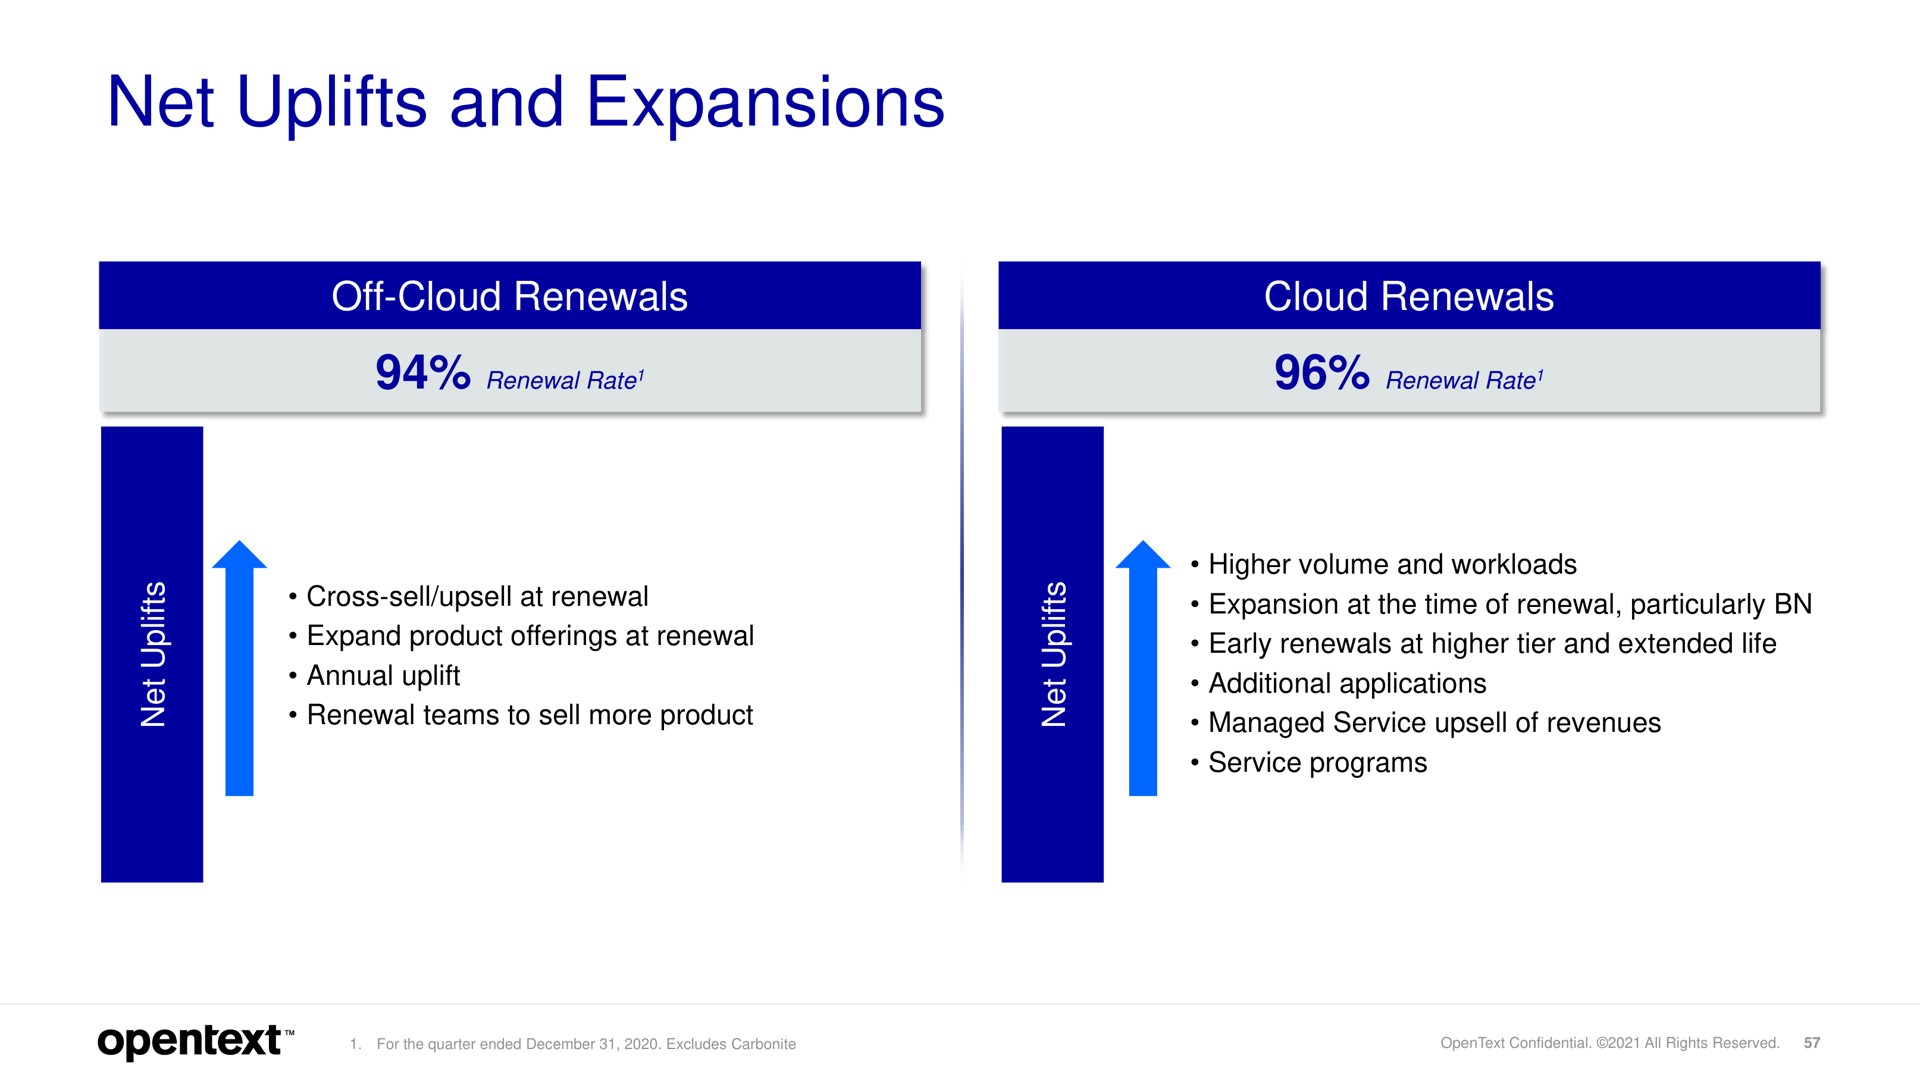 net uplifts and expansions | OpenText